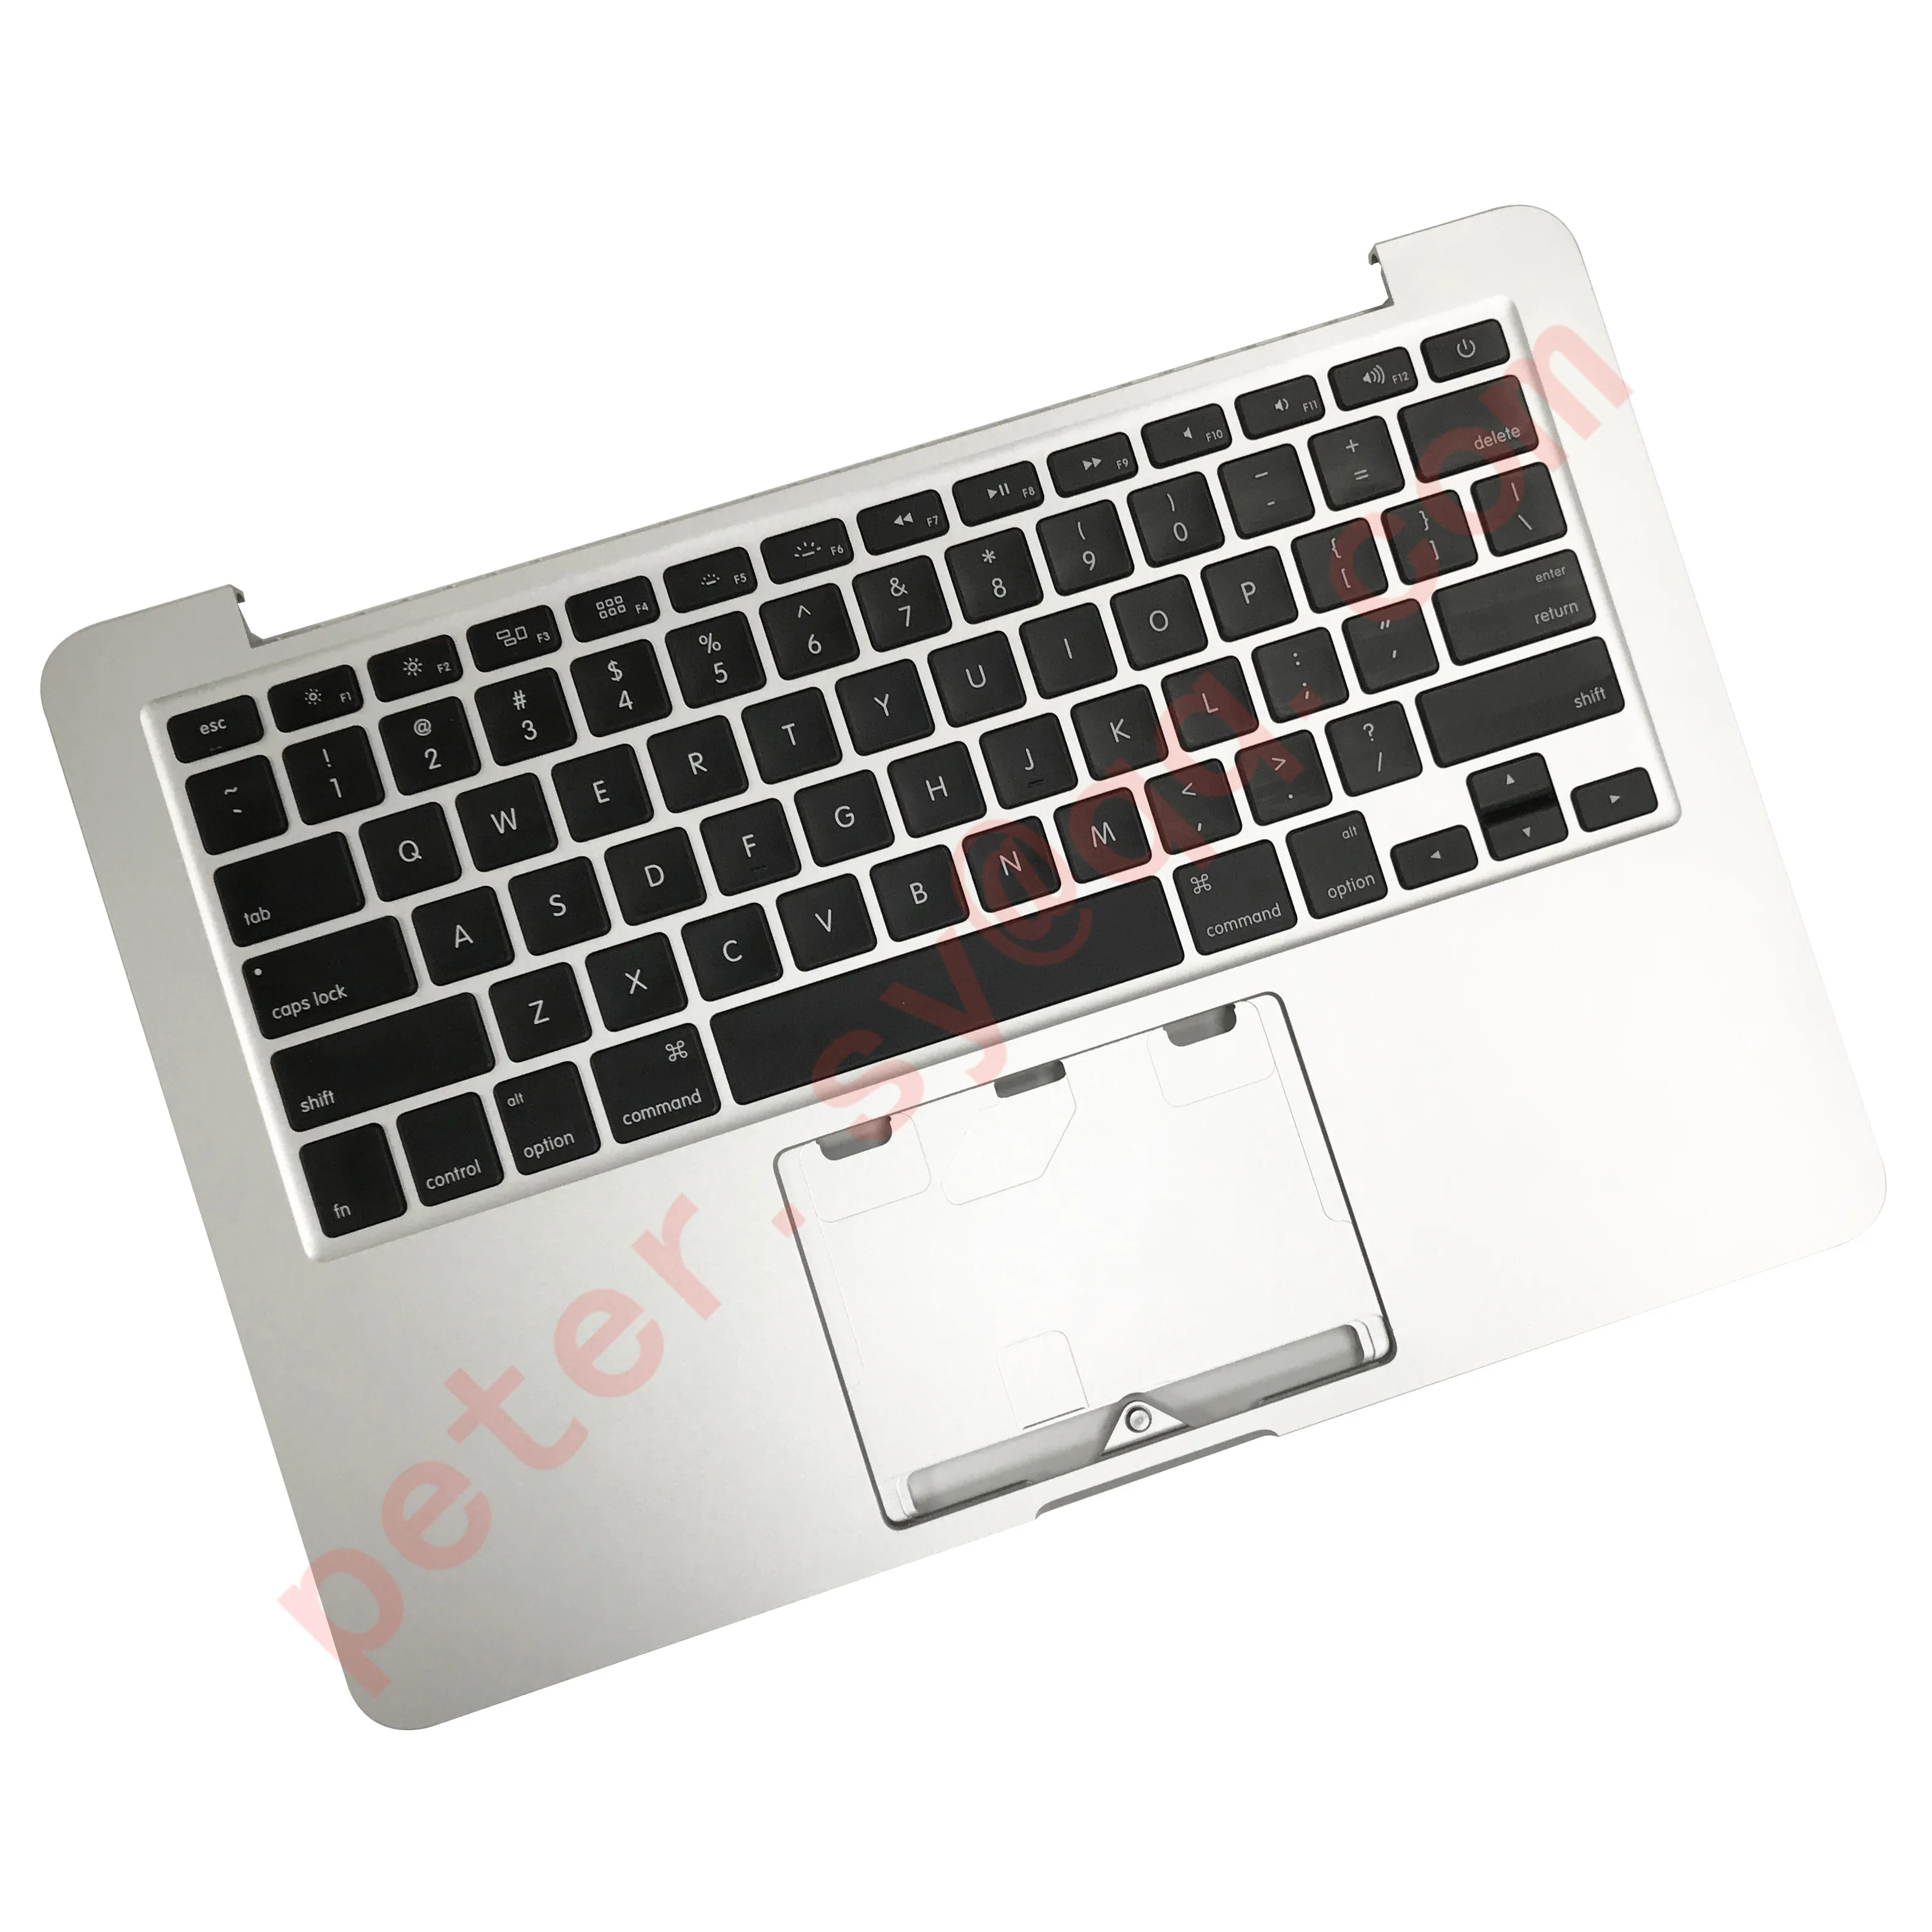 

US A1502 Topcase with keyboard backlight for Macbook Pro Retina 13.3" C housing cover Top case 2013-2014